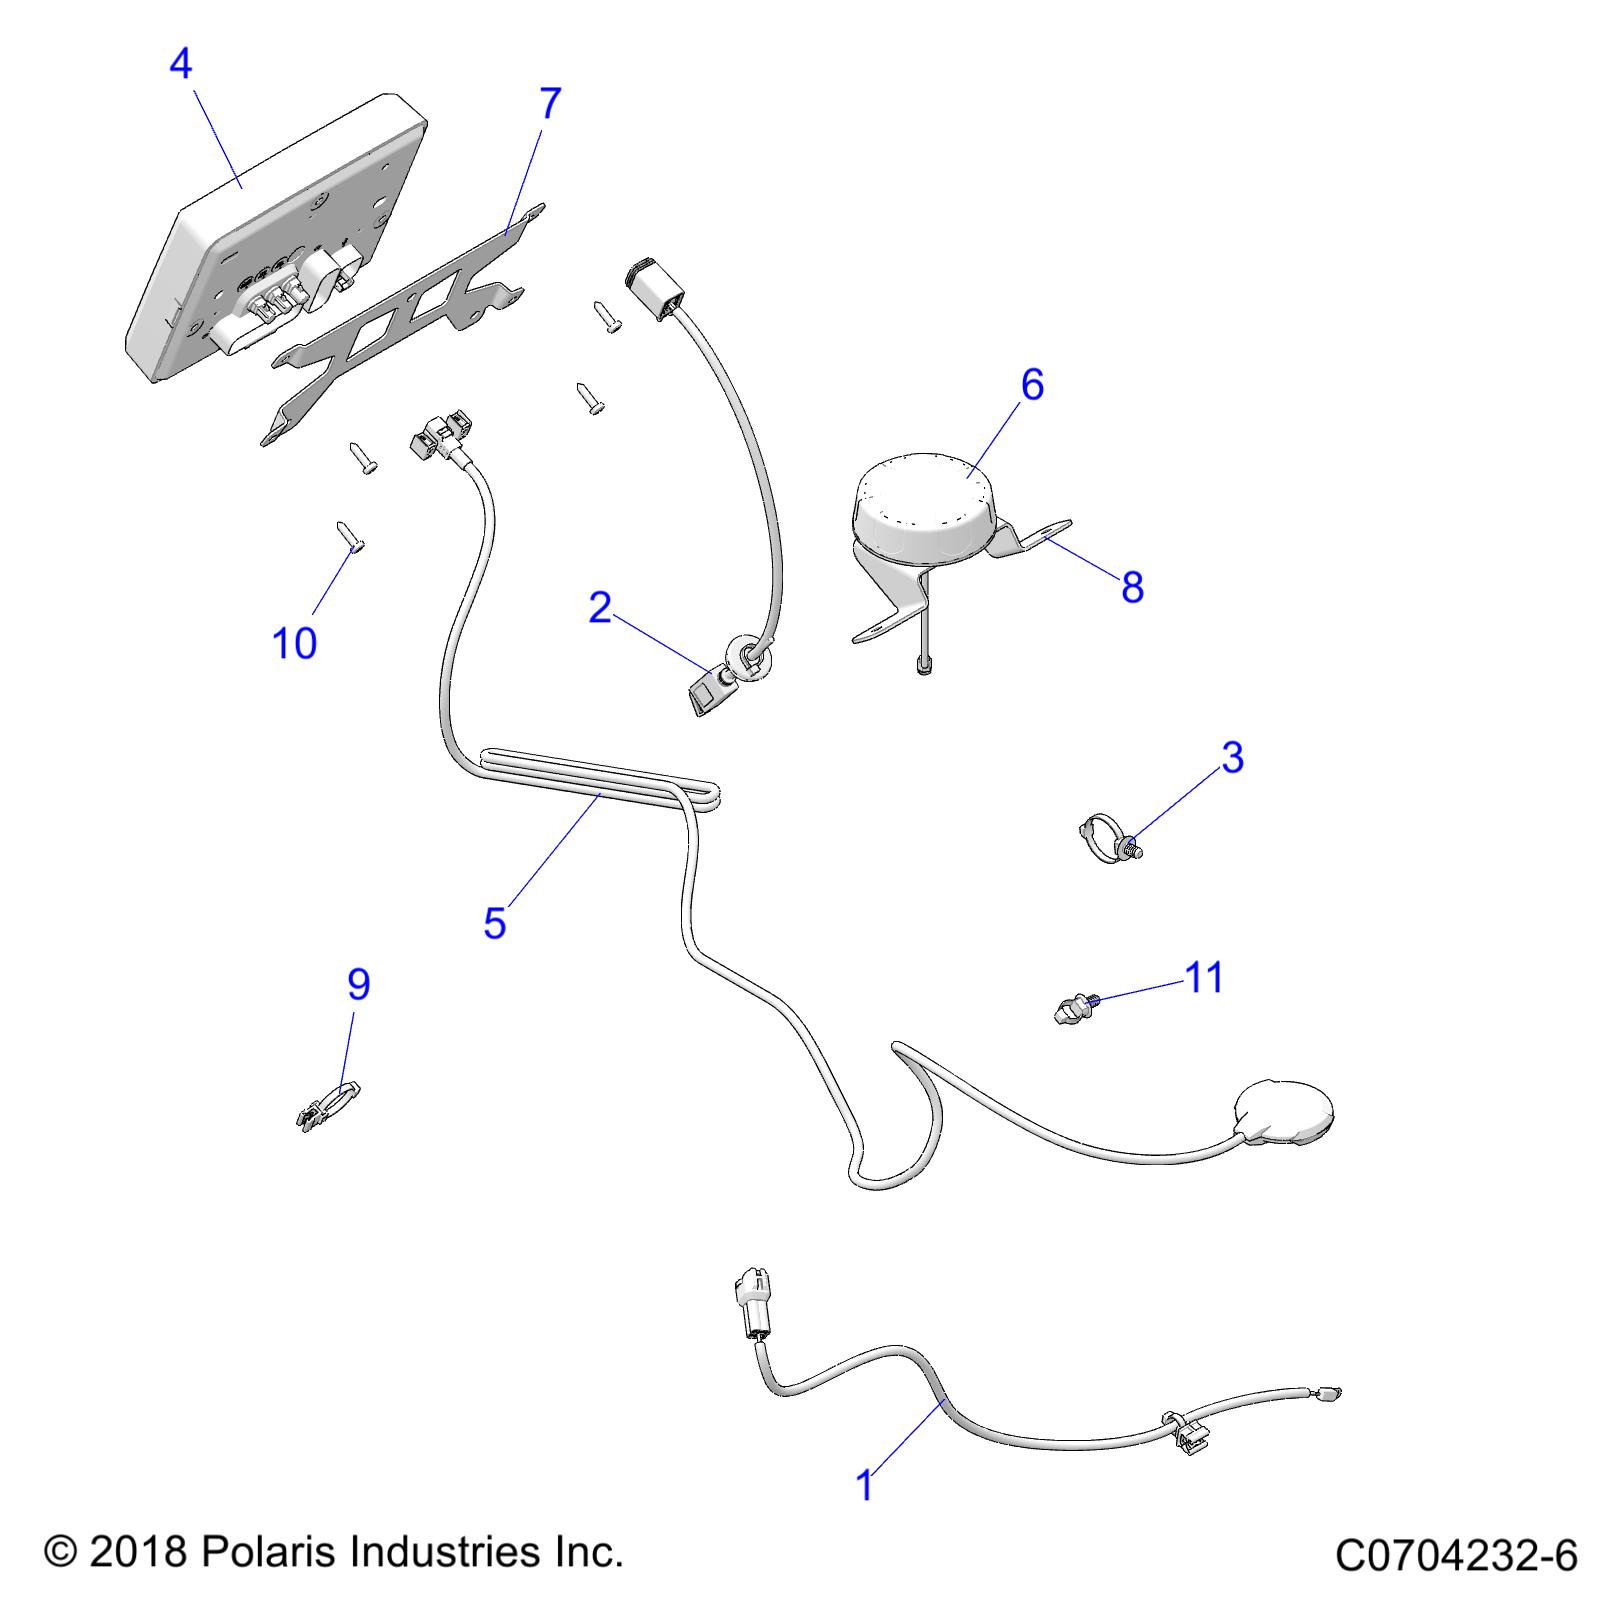 Part Number : 2414710 USB HARNESS